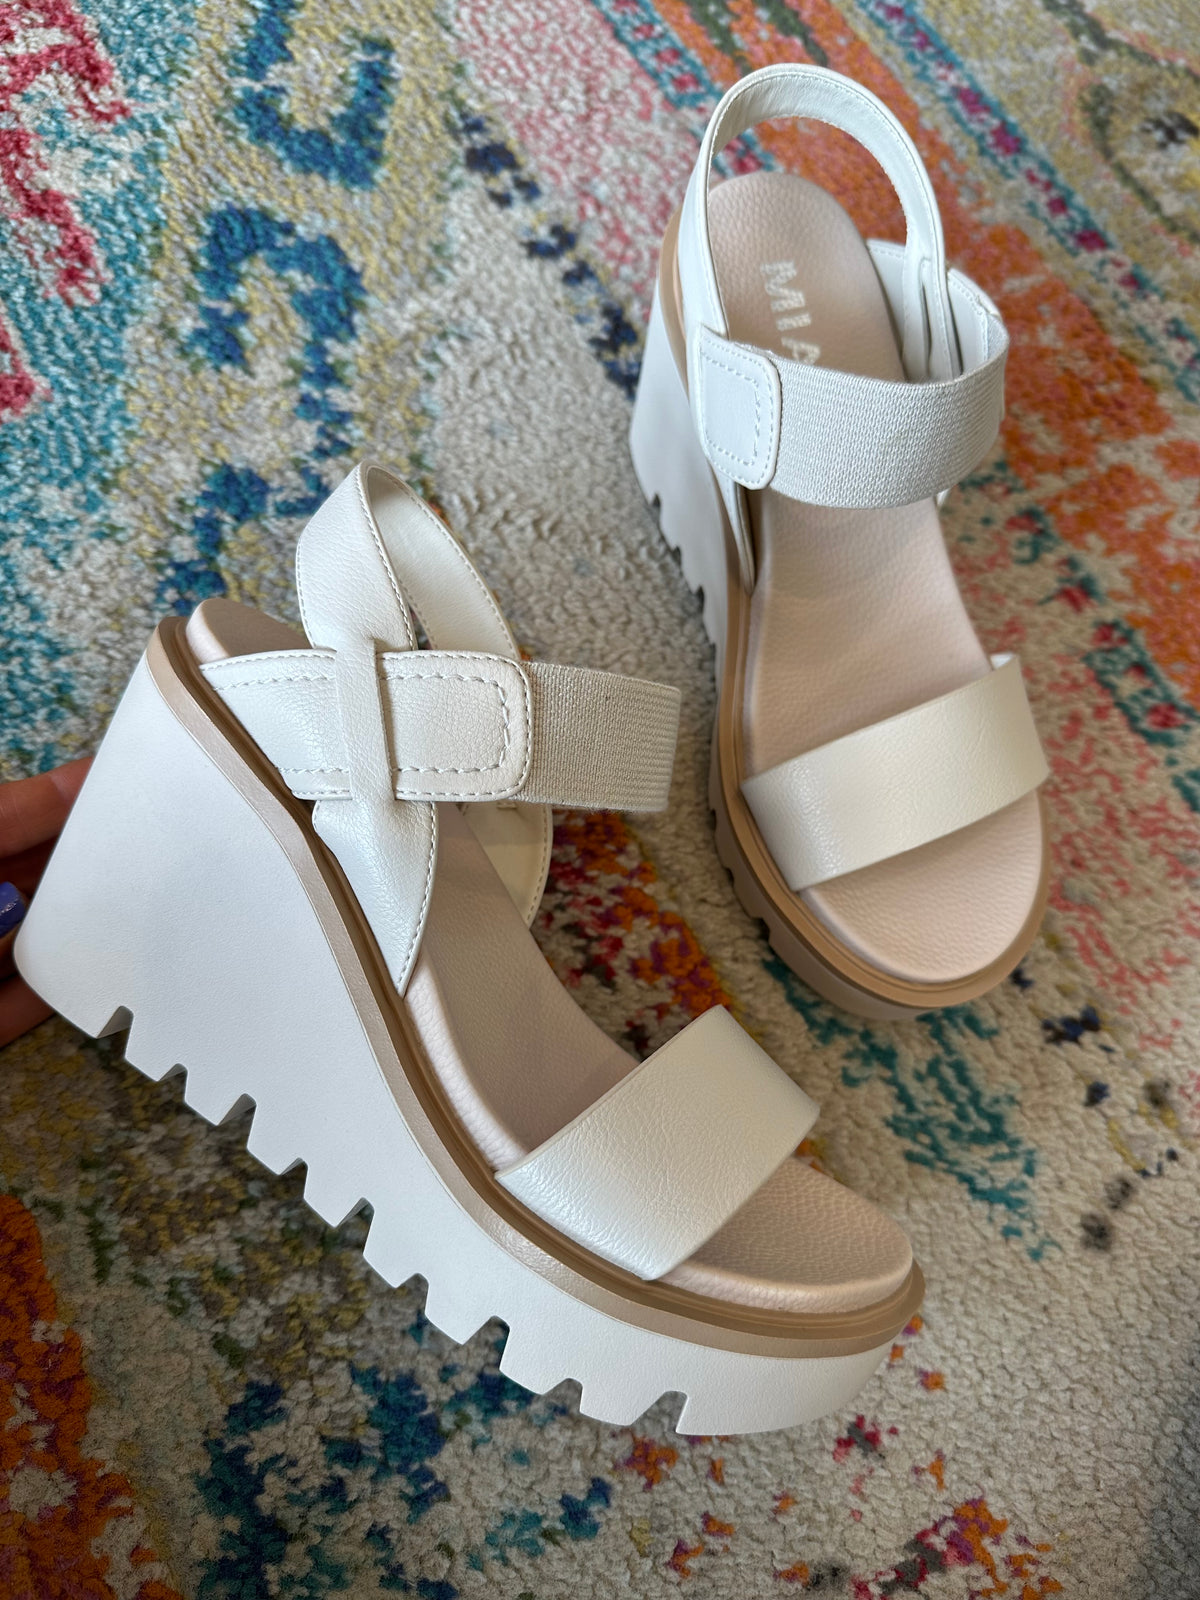 Lily Wedges